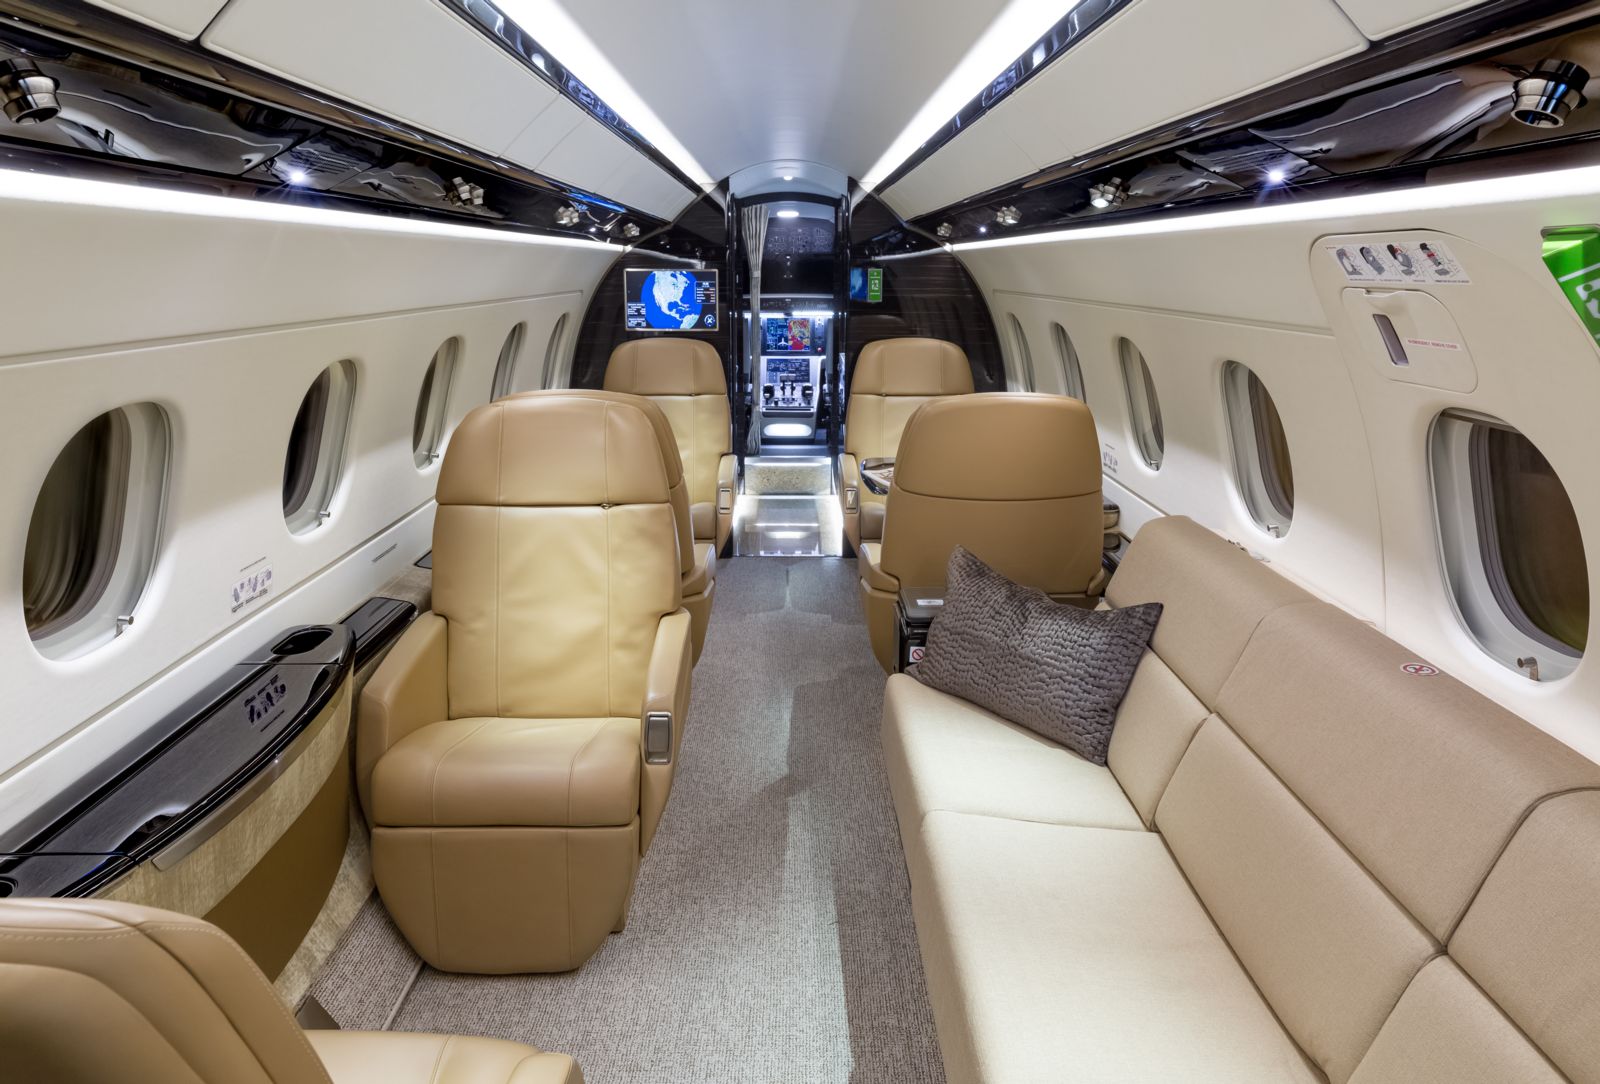 Embraer Legacy 500  S/N 55000049 for sale | gallery image: /userfiles/images/Legacy500_sn49/aft%20fwd.jpg